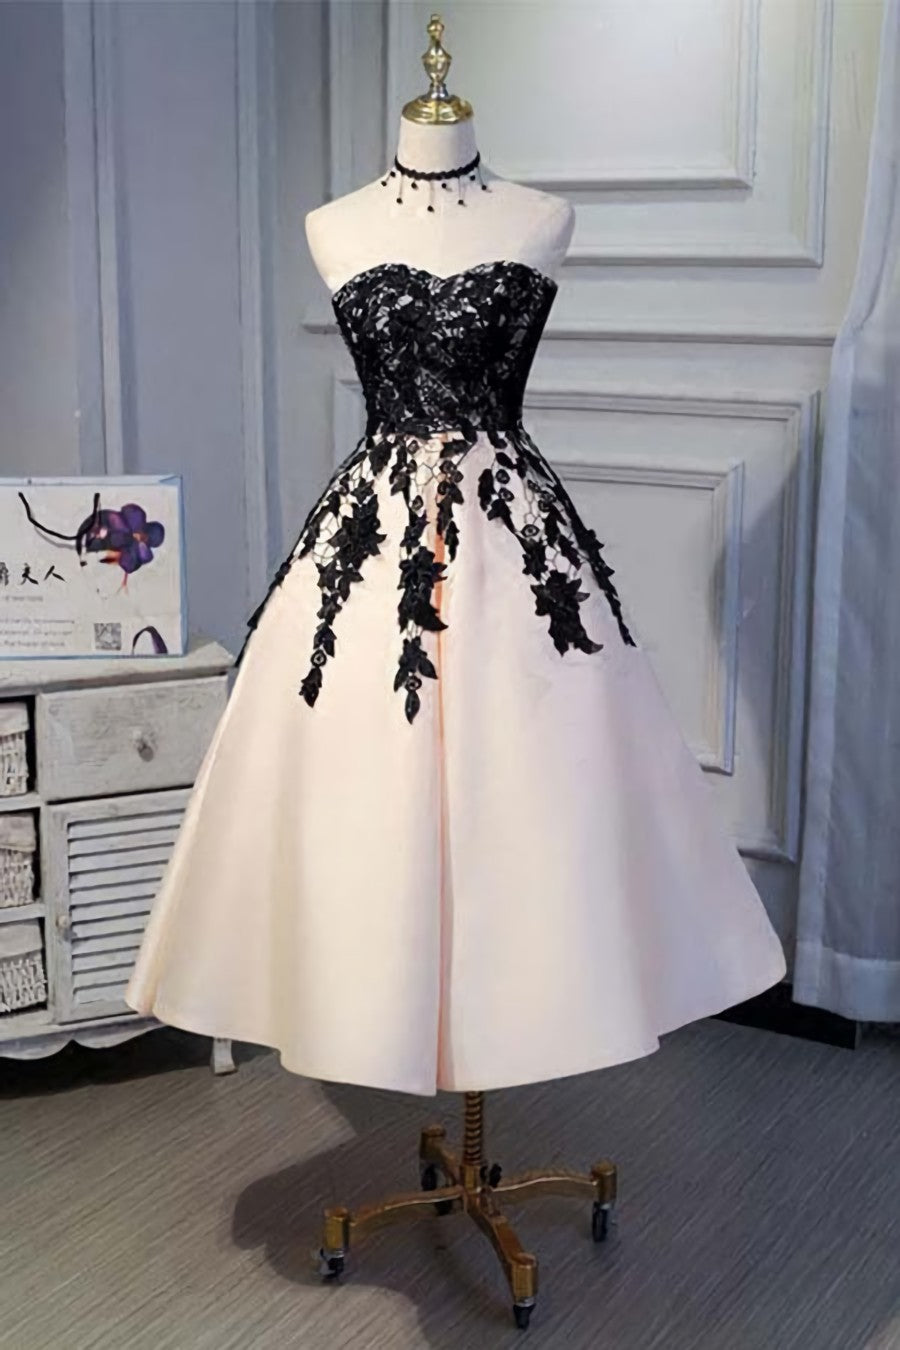 A-line Satin Short Prom Dresses For Black girls For Women,Homecoming Dress Outfits For Women with Black Lace